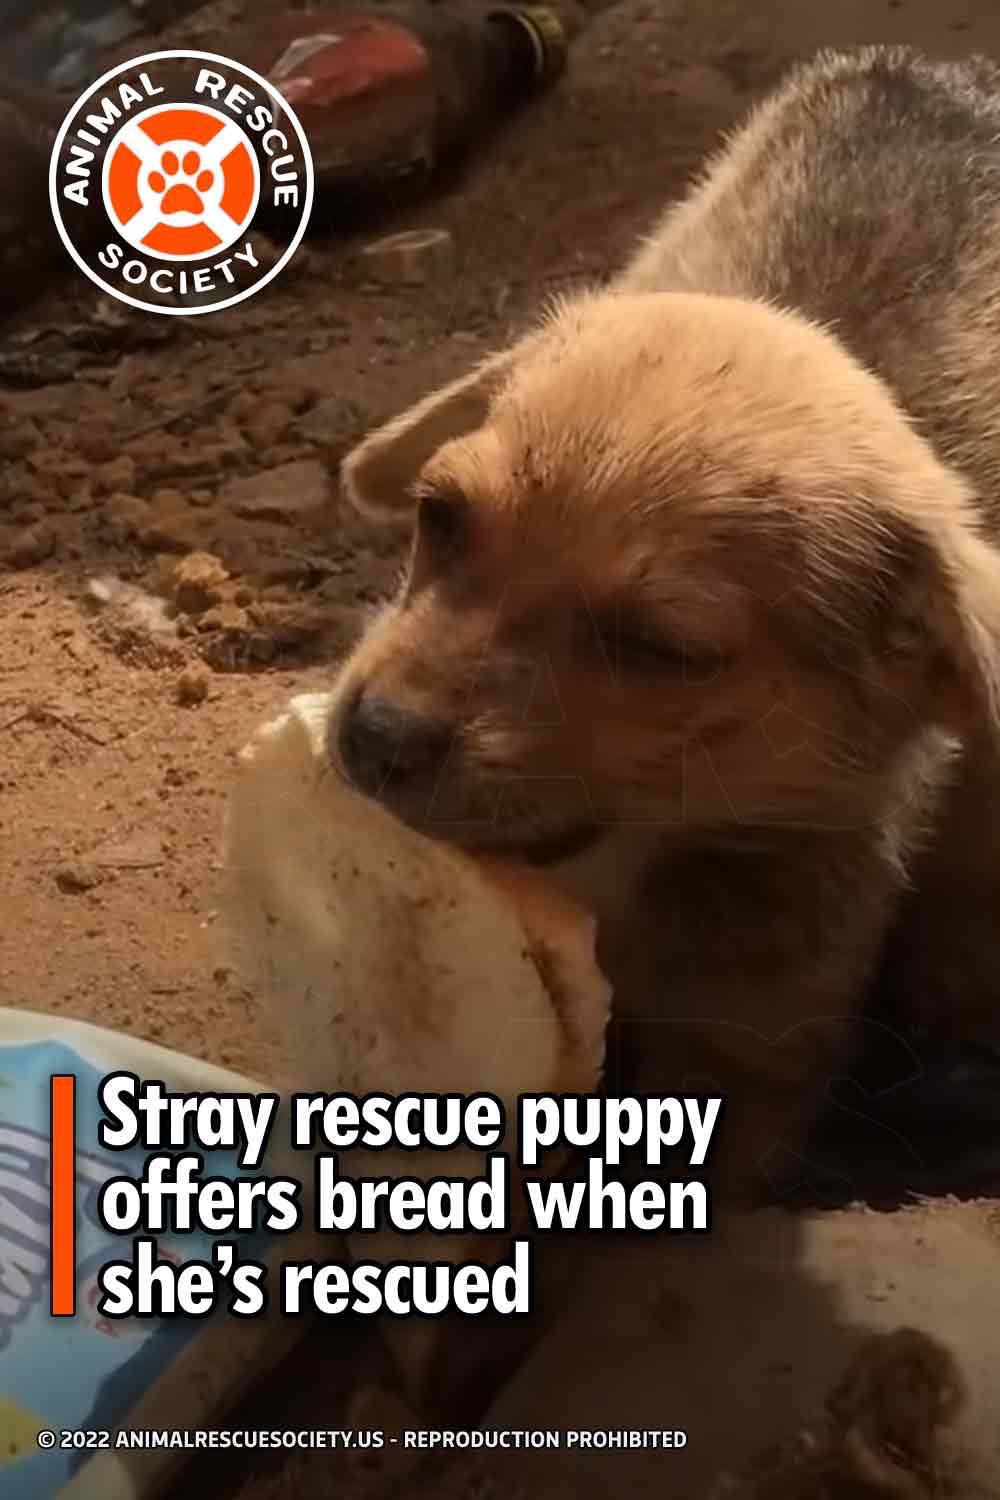 Stray rescue puppy offers bread when she’s rescued.